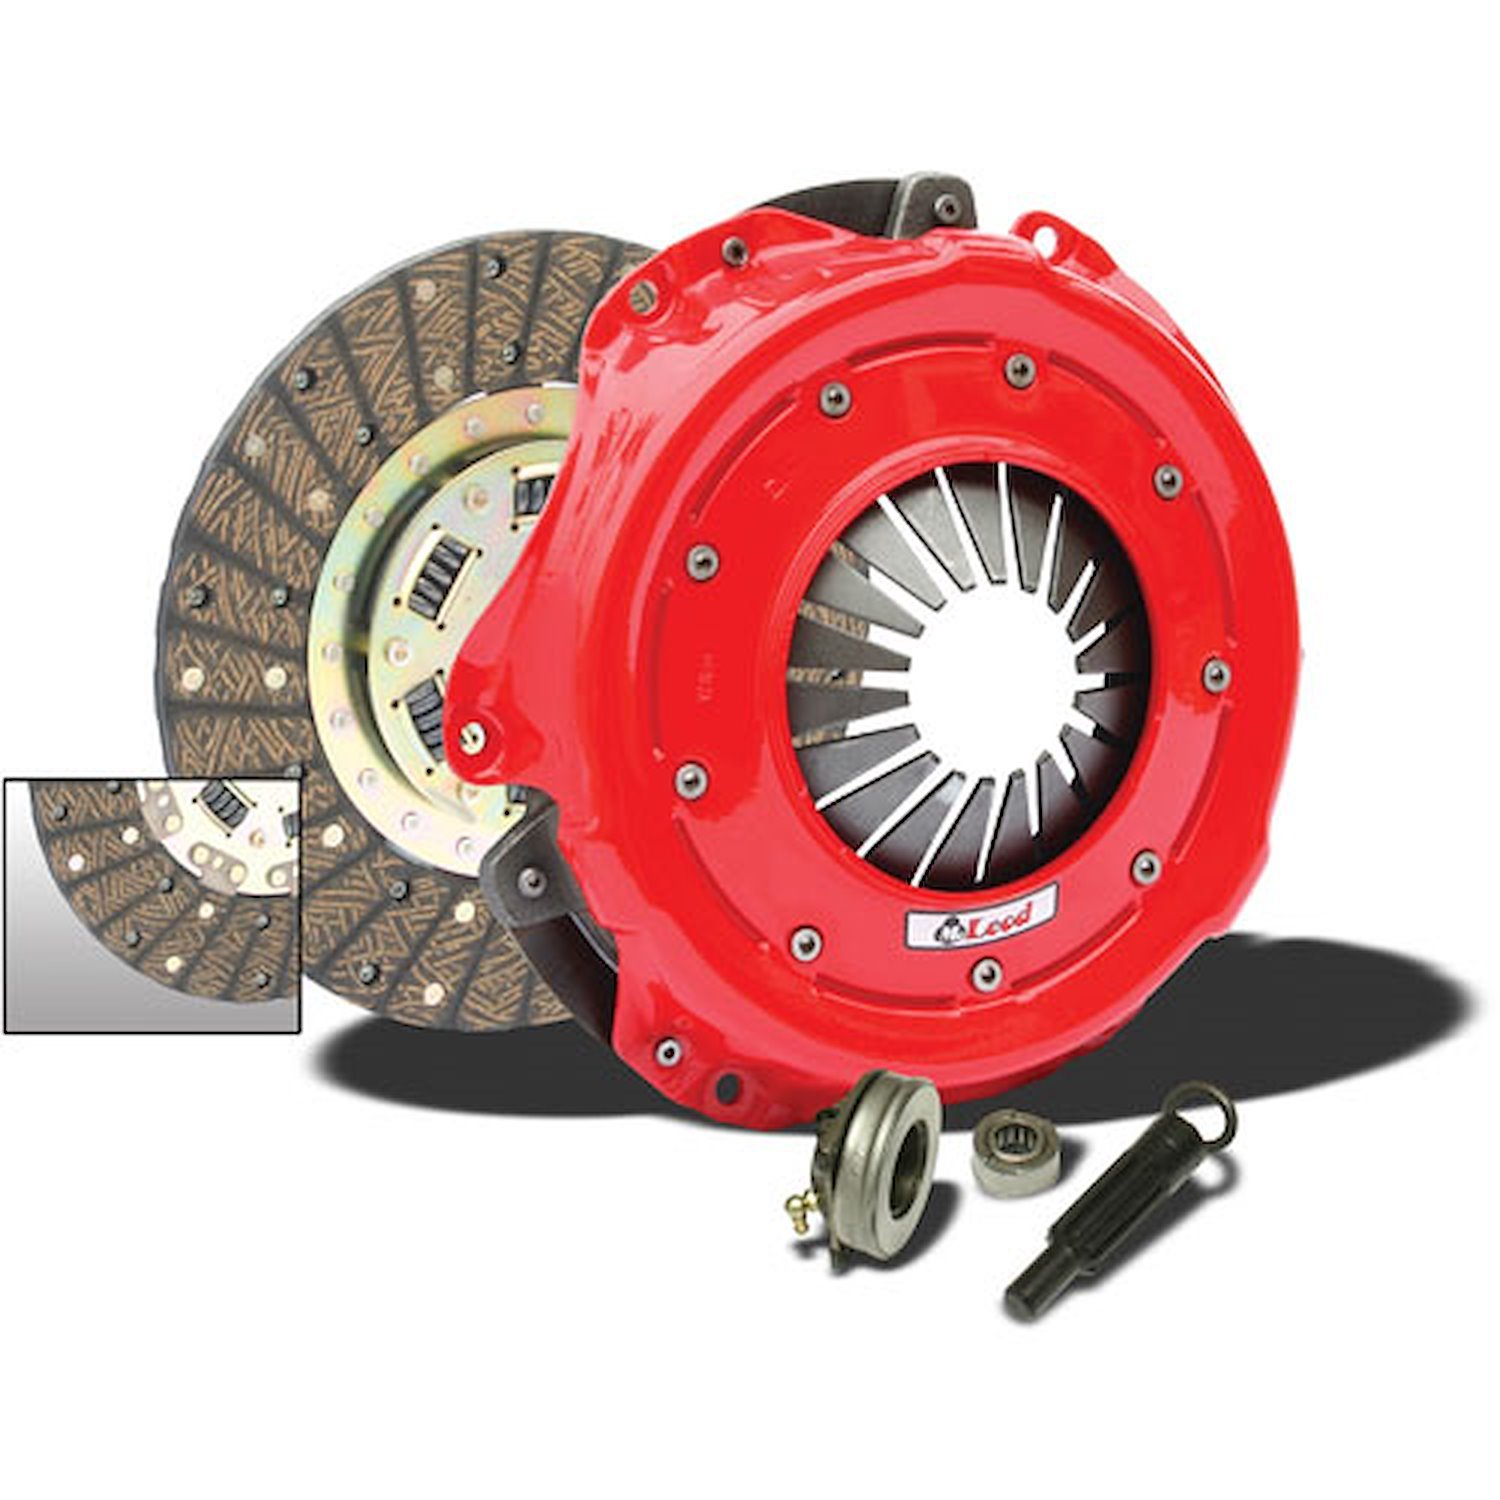 STREET PRO CLUTCH KIT Mustang 2011 and up 5.0L 1-1/8 x 26 Spline Excellent street clutch capable of